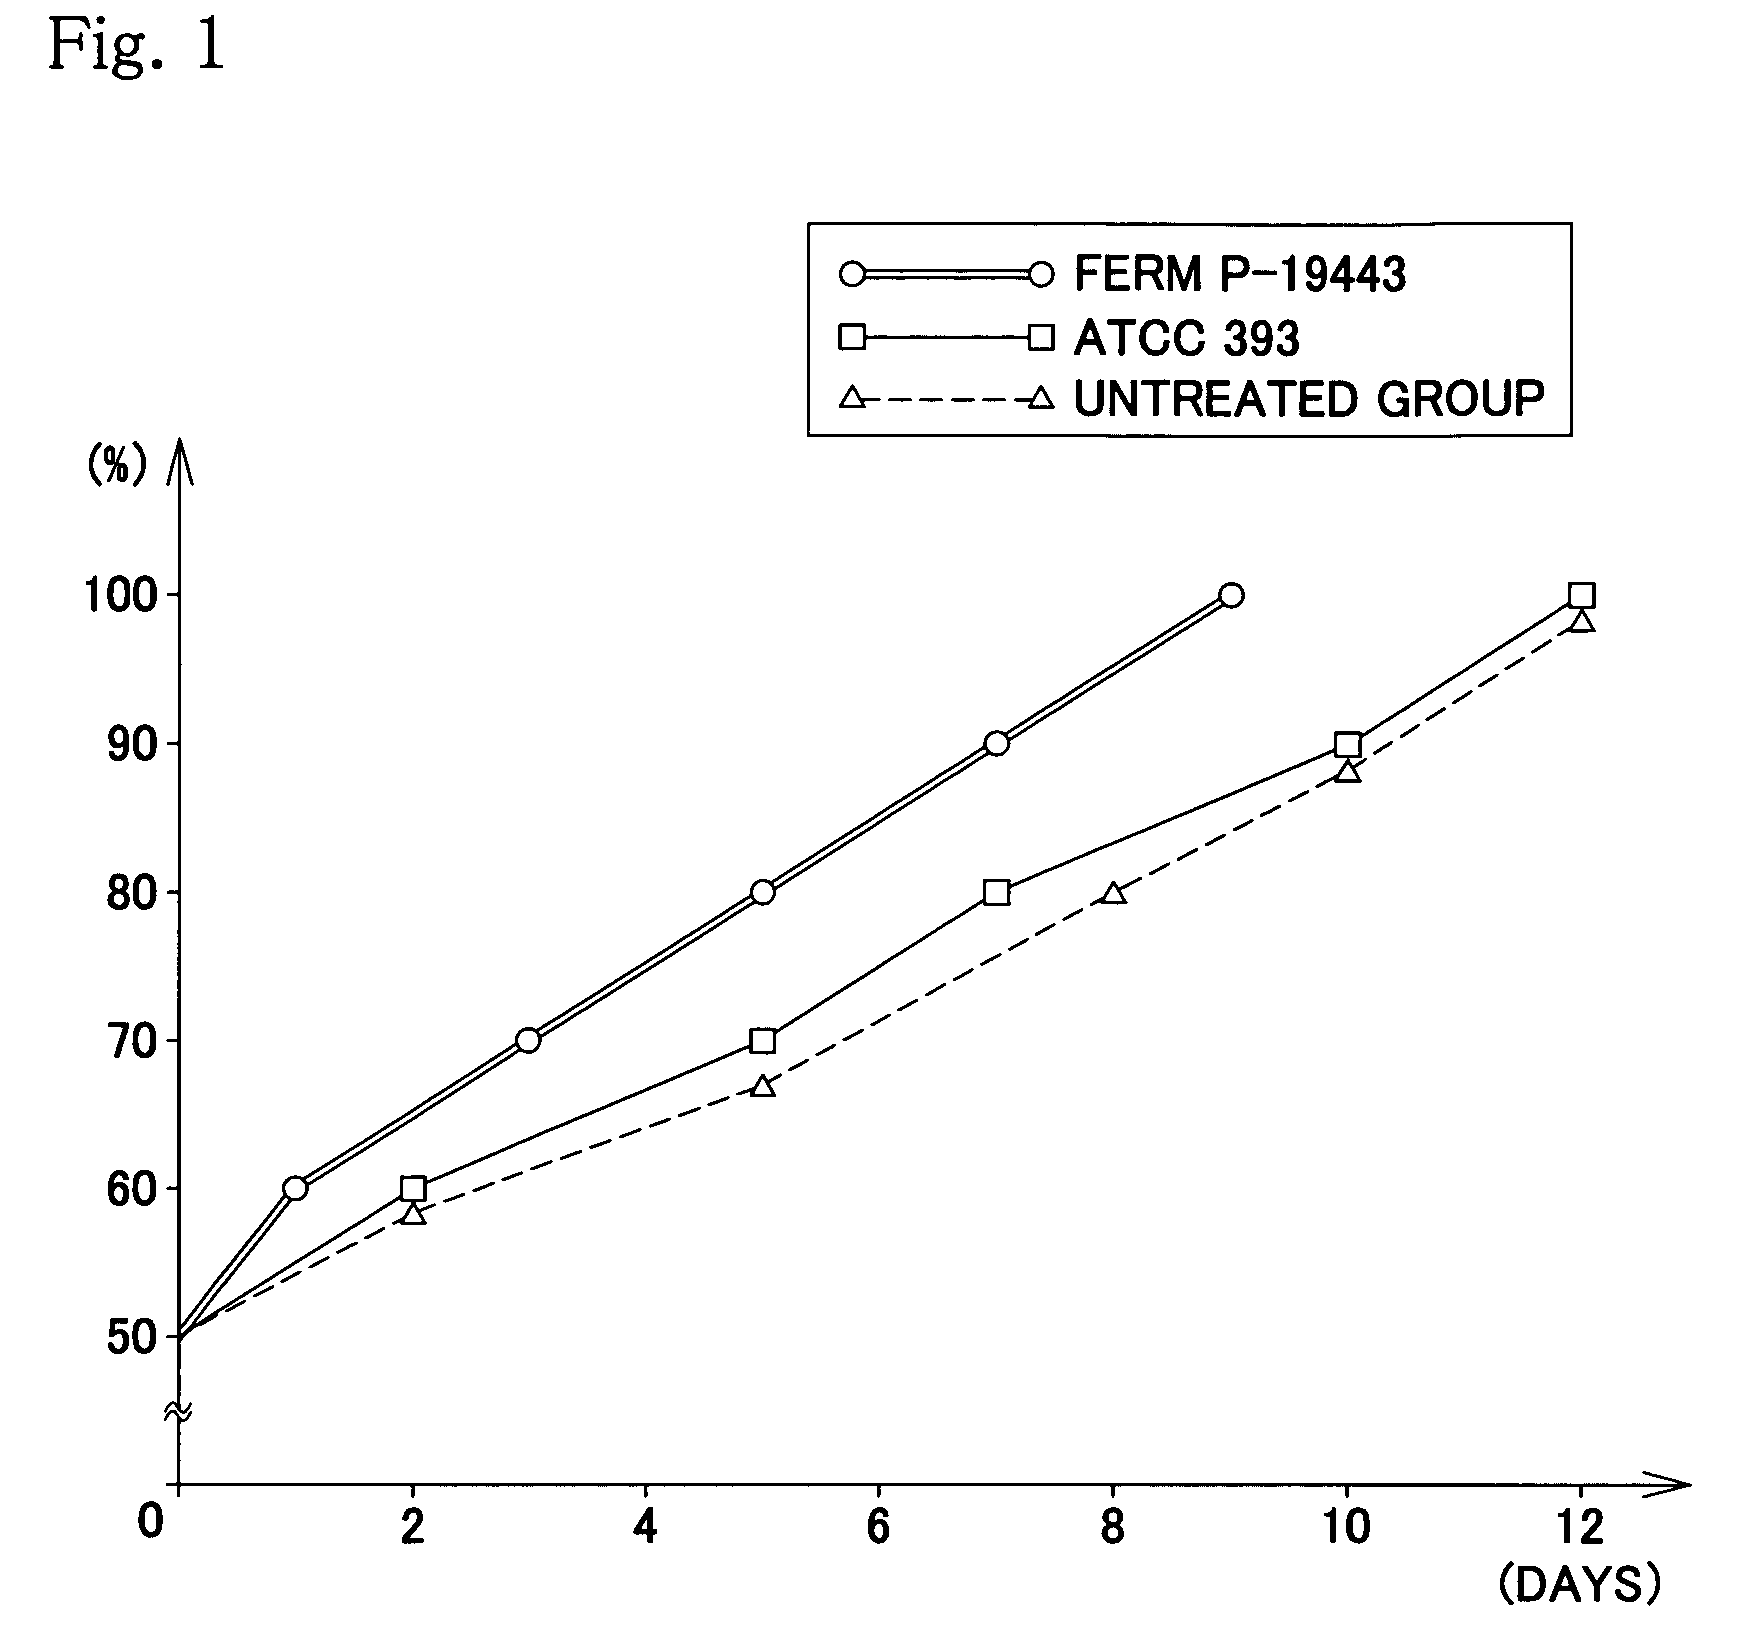 Method for treating periodontal disease with a bacteriocidal disinfectant